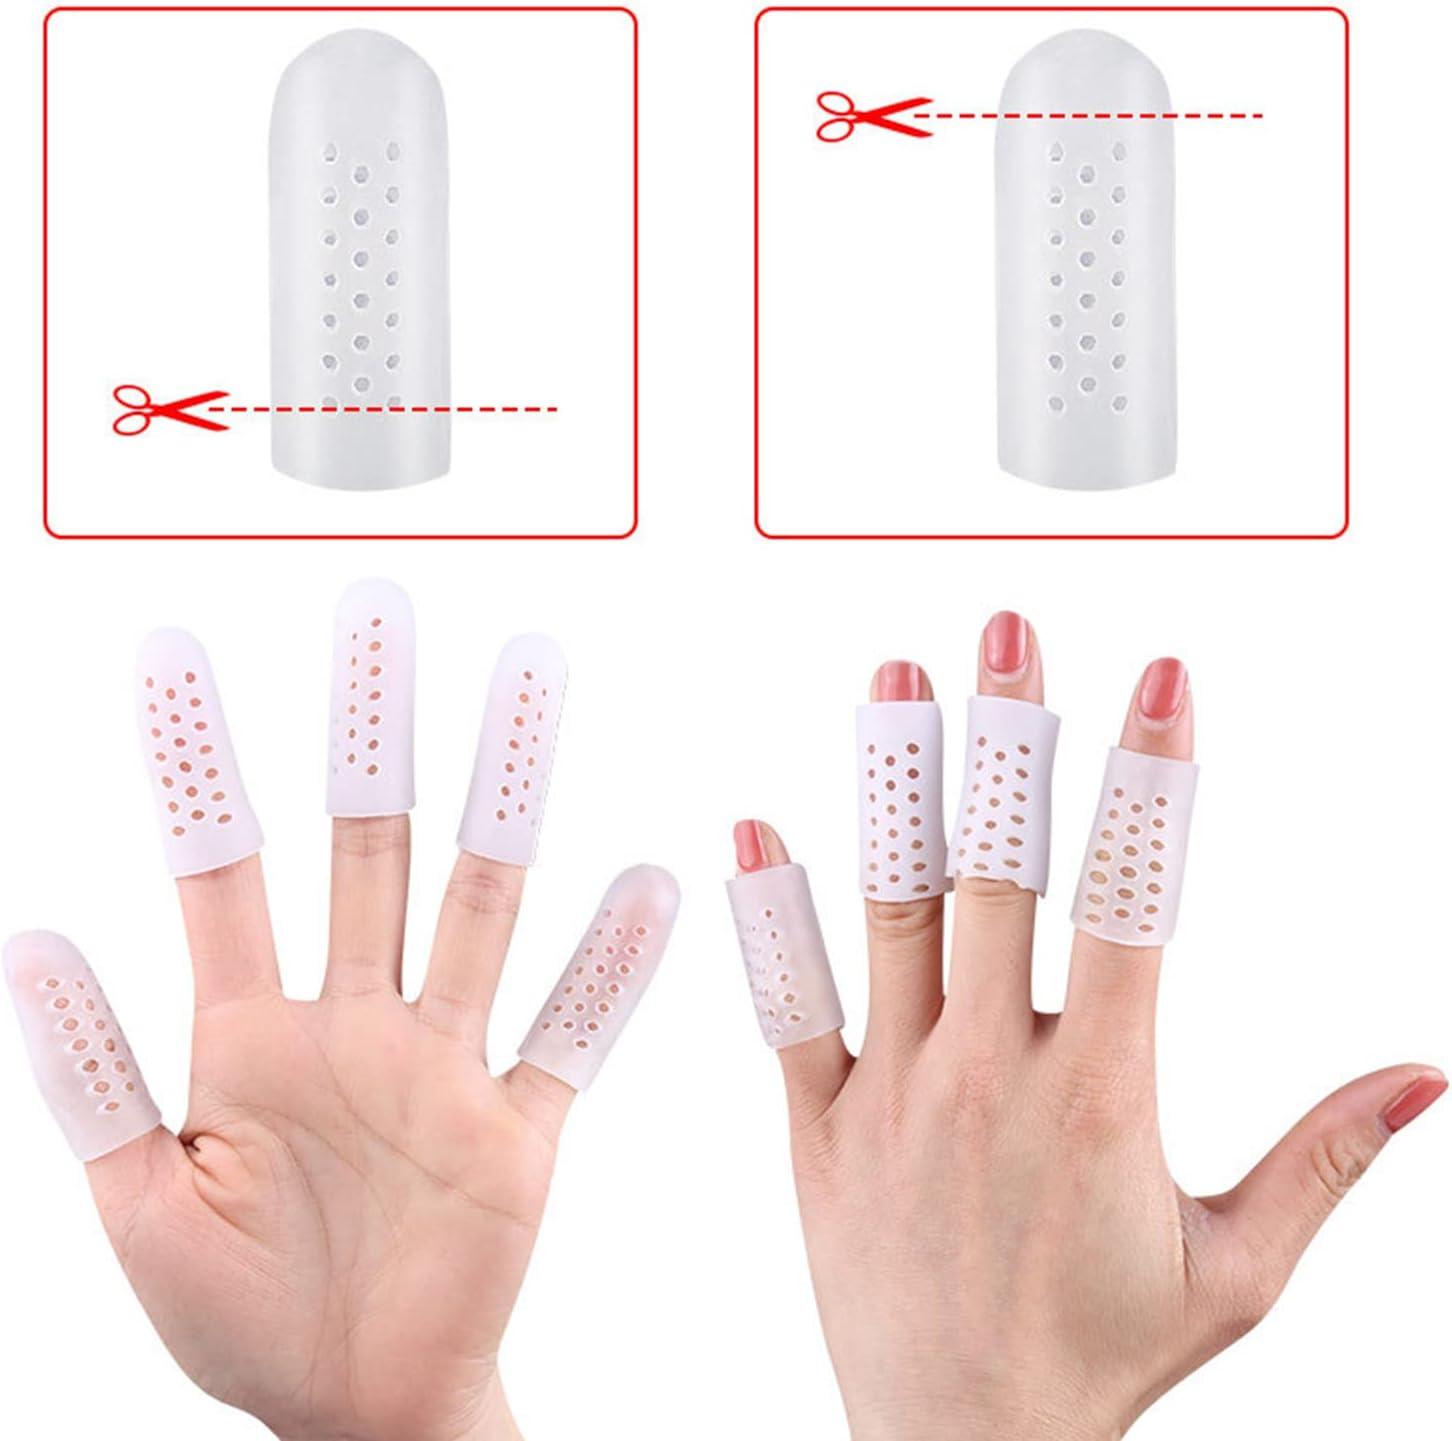 Buy Sumifun Finger Cots, 10 Gel Finger Protector for Callus, Scald